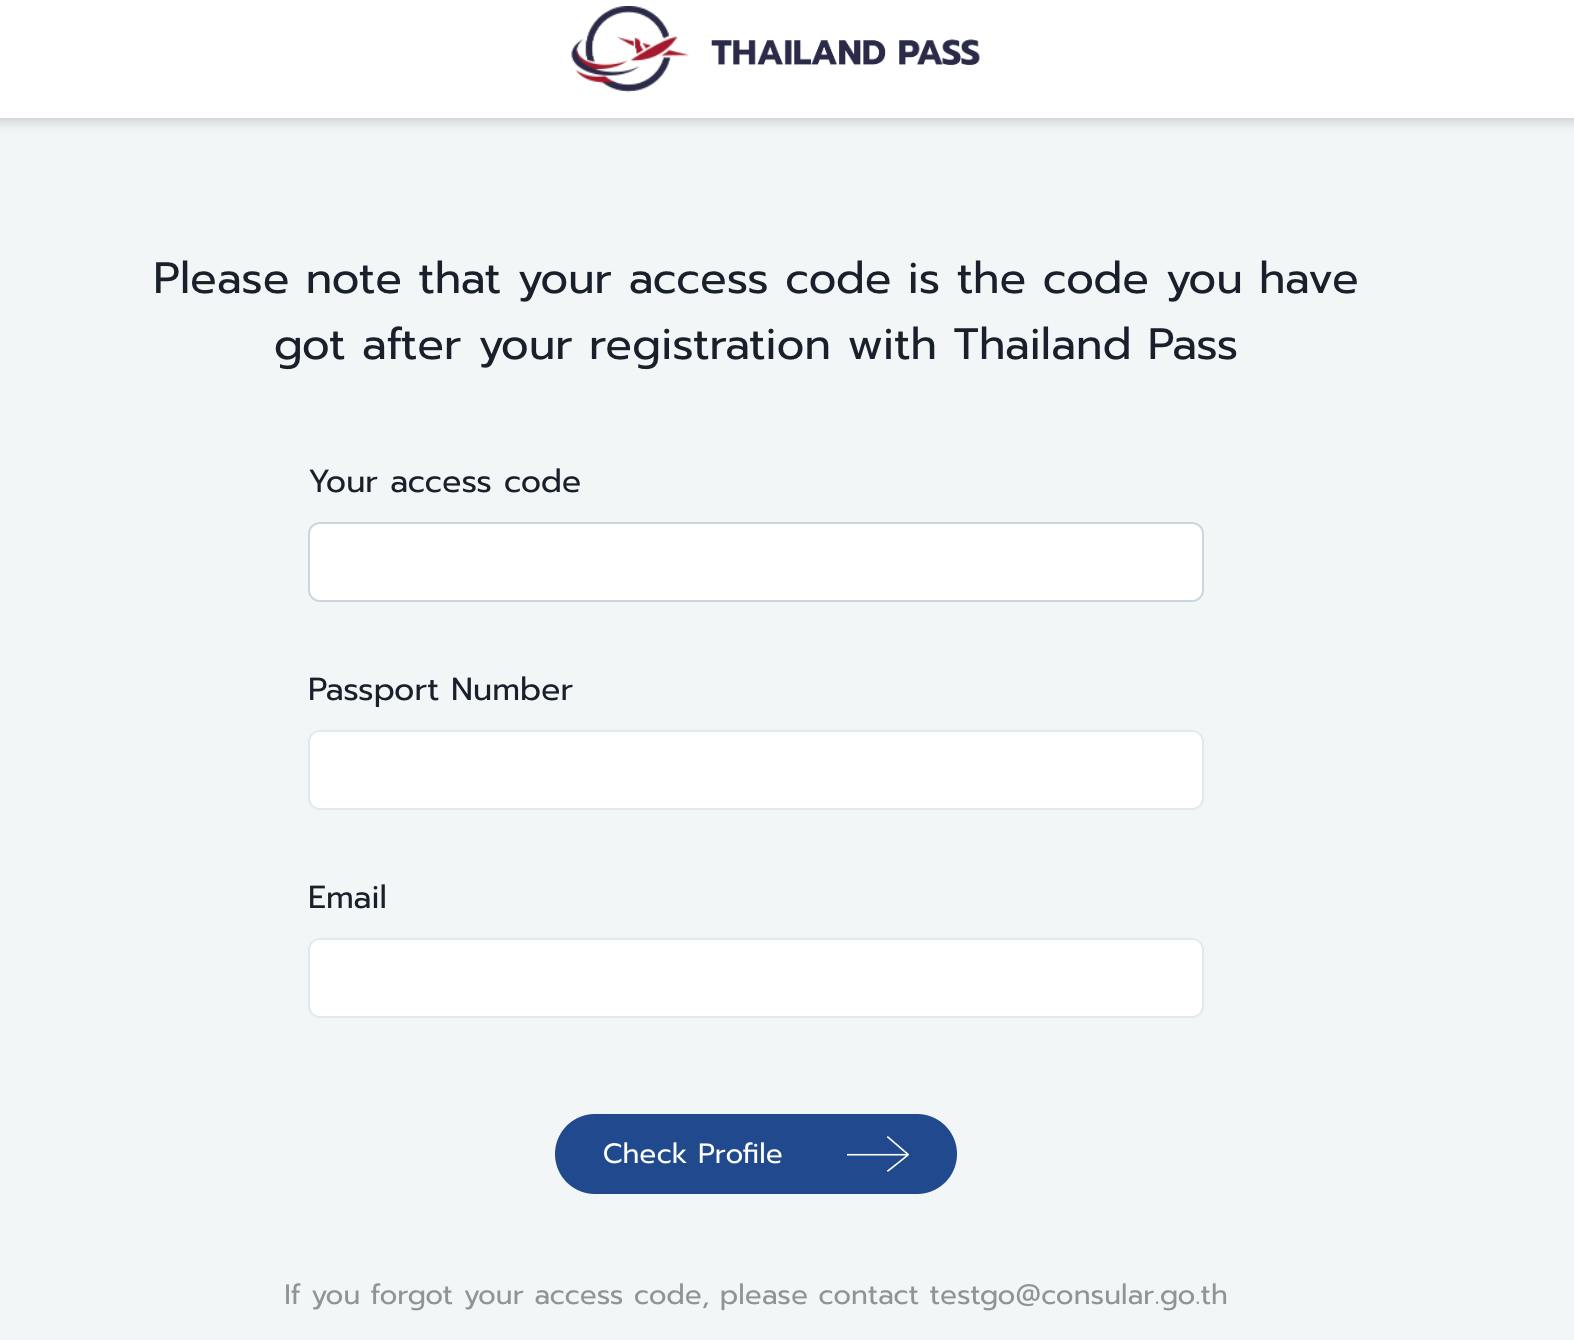 A document displaying how to check your Thailand Application Status by providing access code, passport number and email adress.